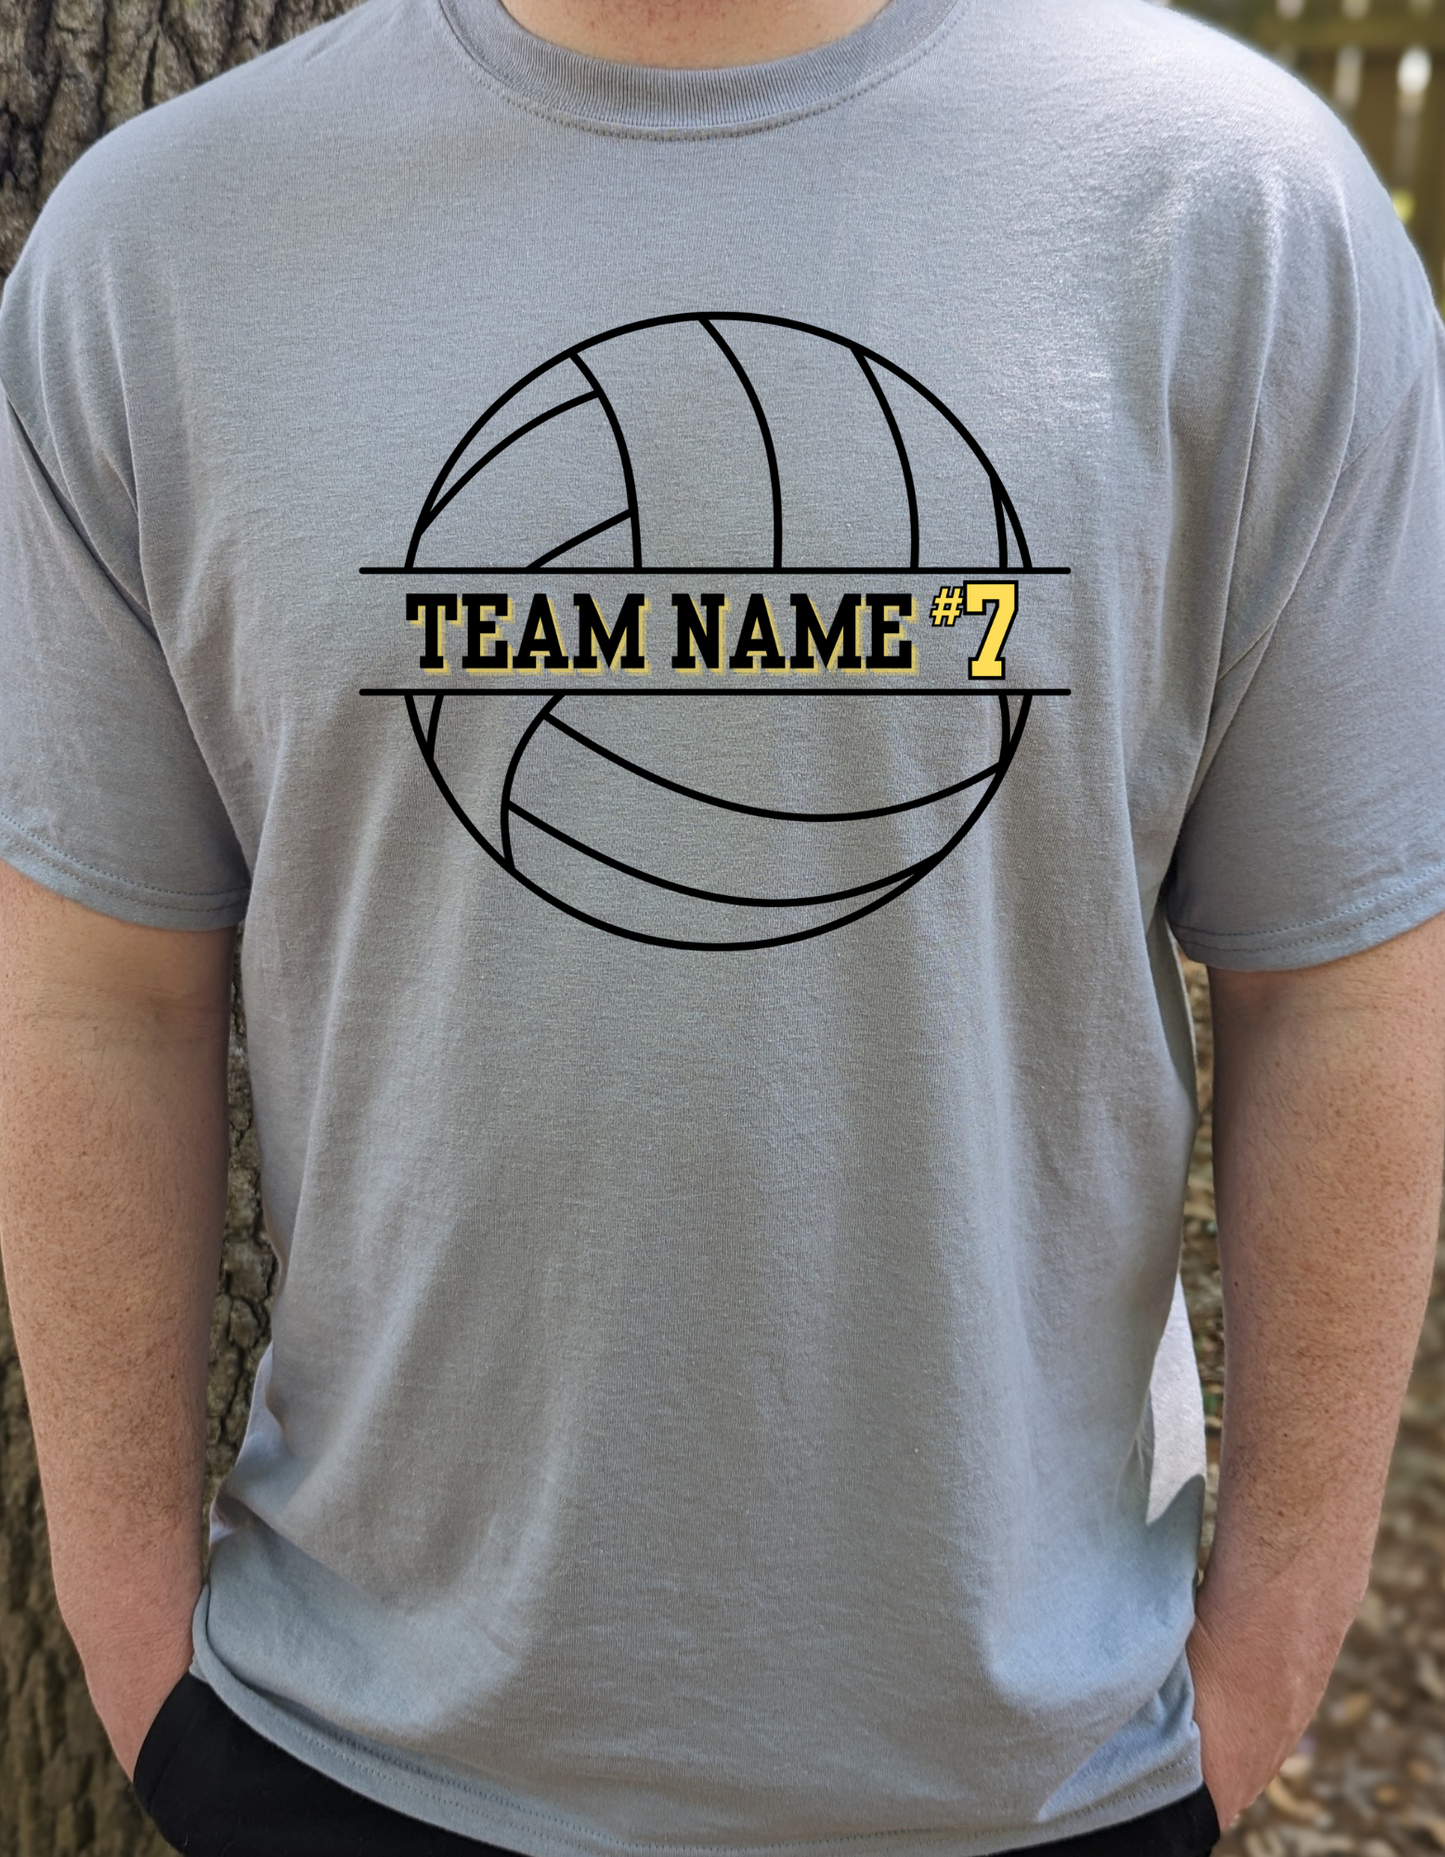 Team Name with Number Volleyball Unisex Tee